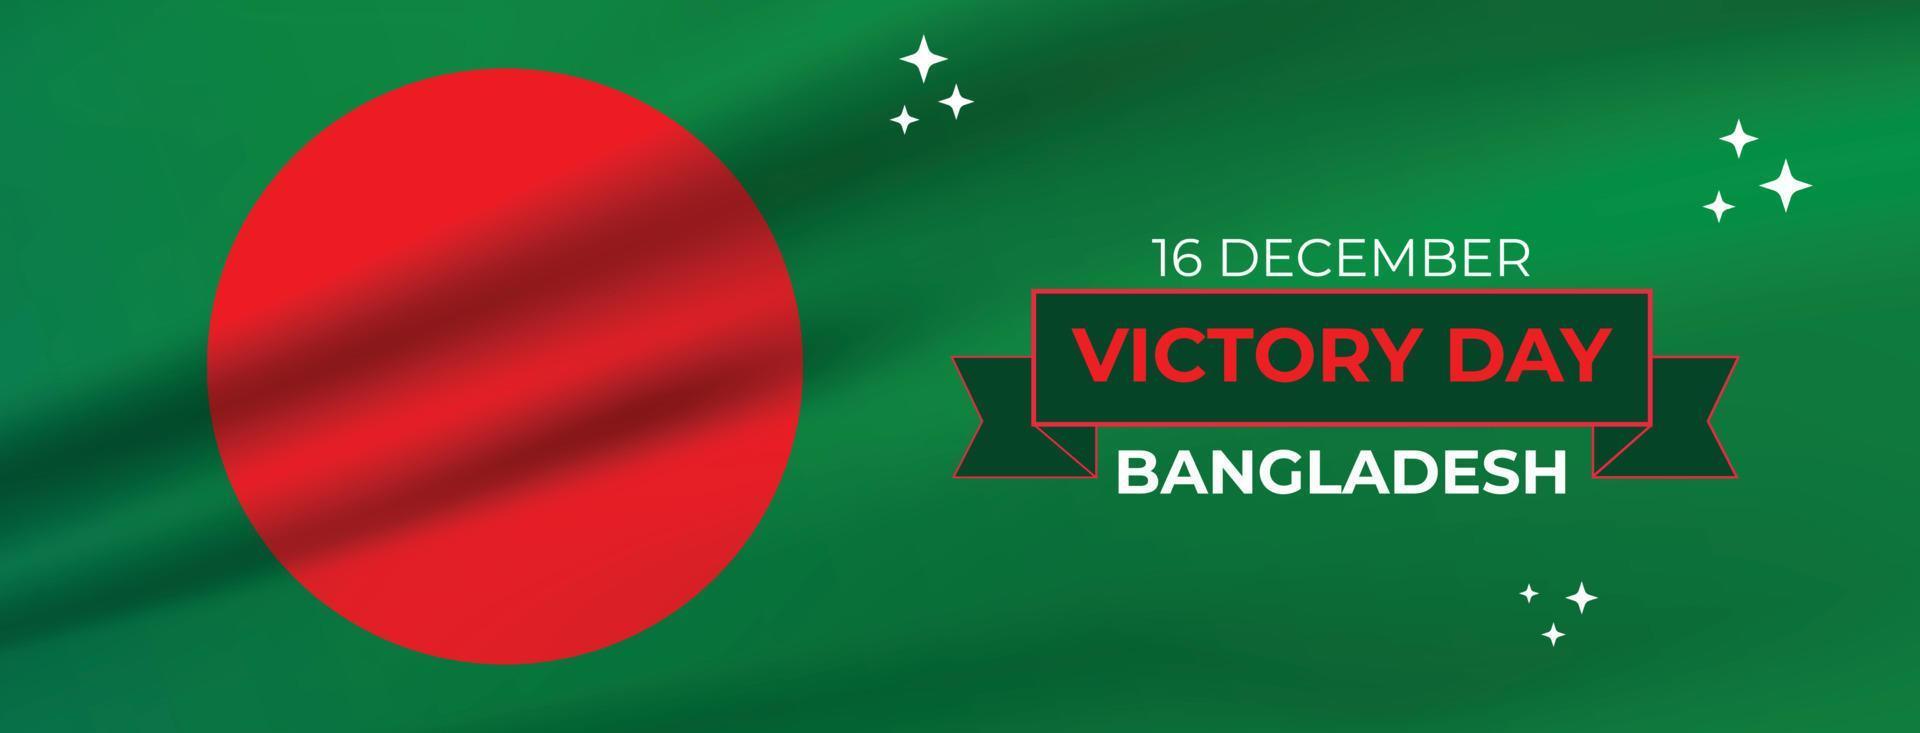 Bangladesh independent and victory day social media banner design vector